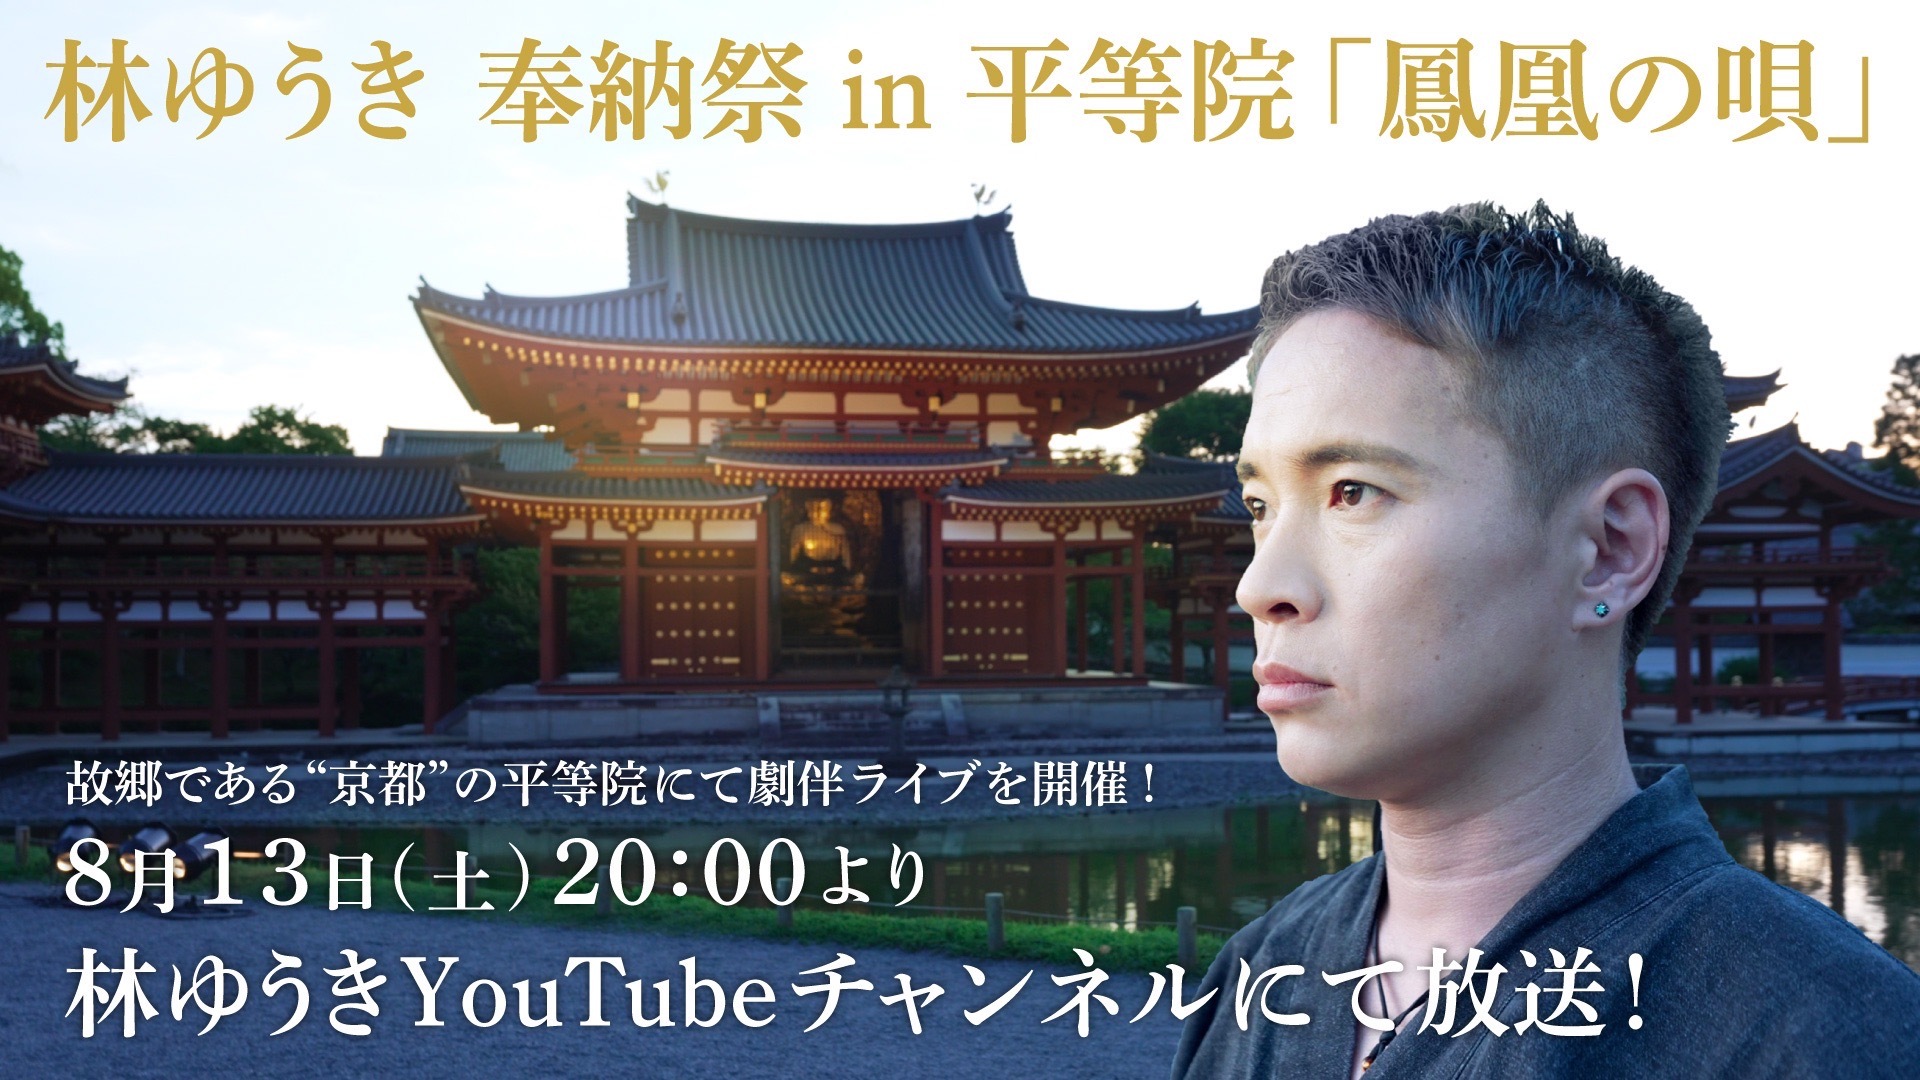 World Heritage Live "Dedication Festival in Byodo-in Temple "Houou no Uta"" will be distributed for free!